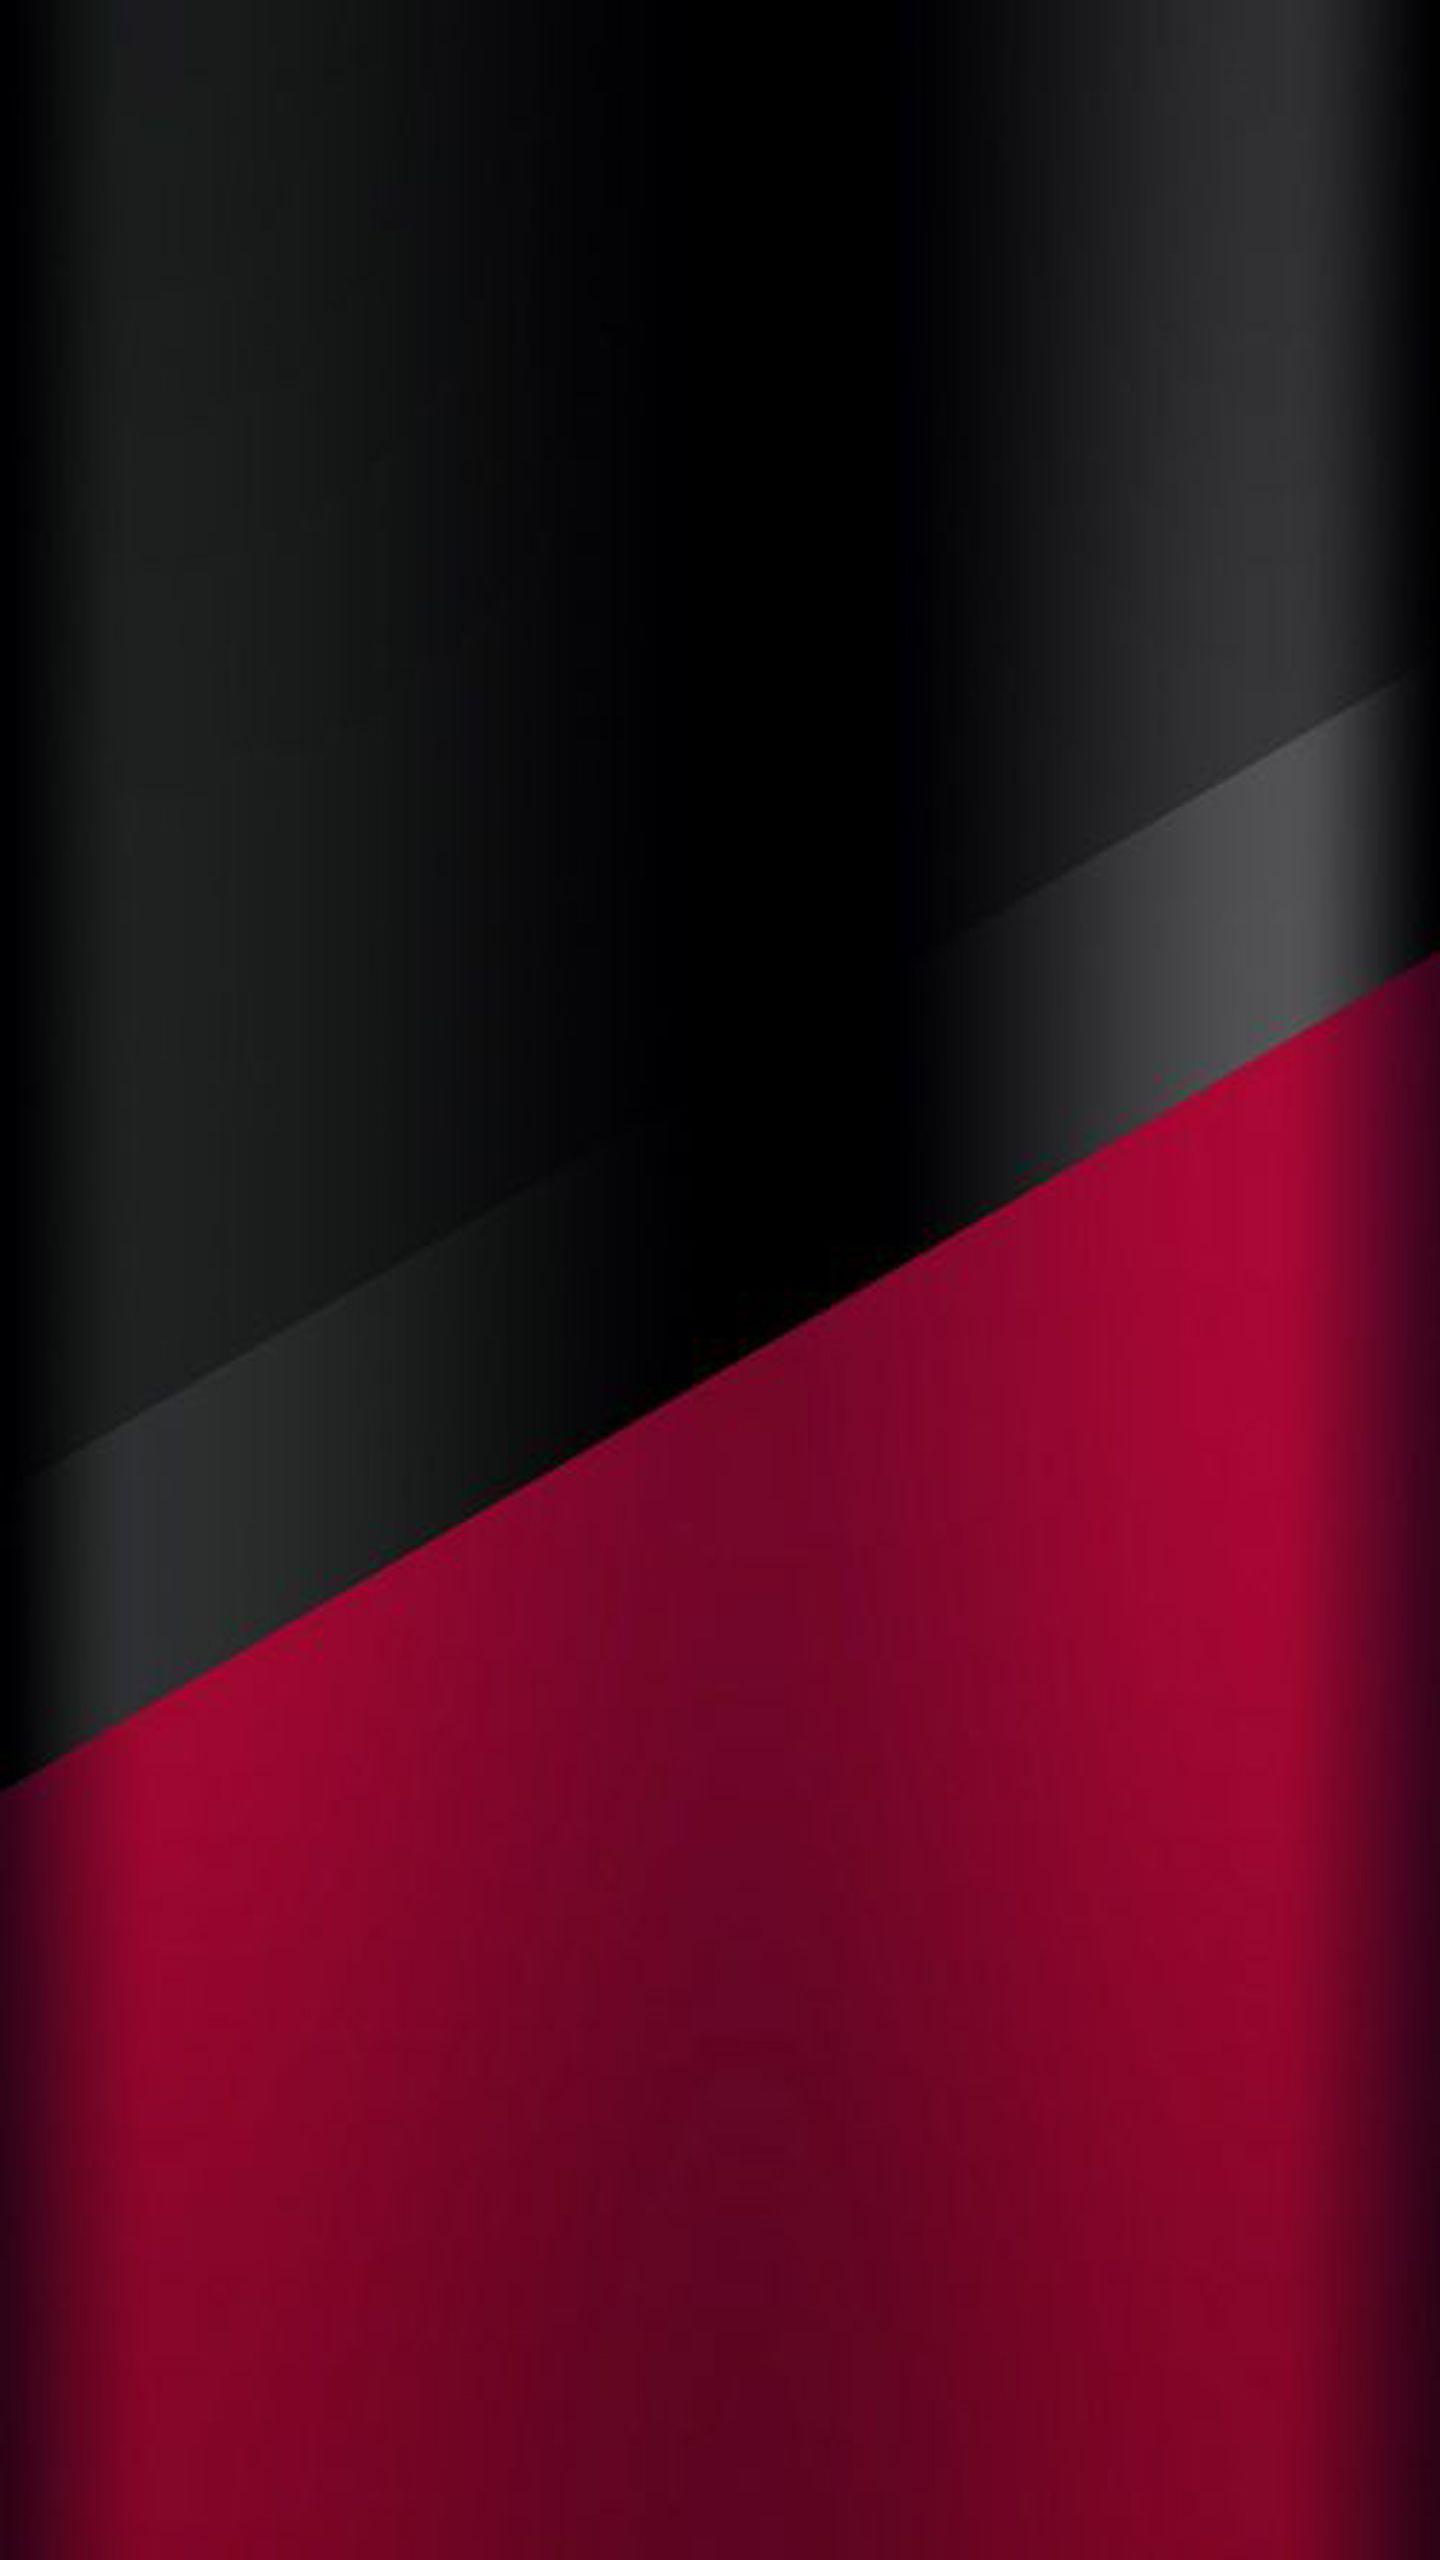 The Dark S7 Edge wallpaper 03 with black and red color. edge7